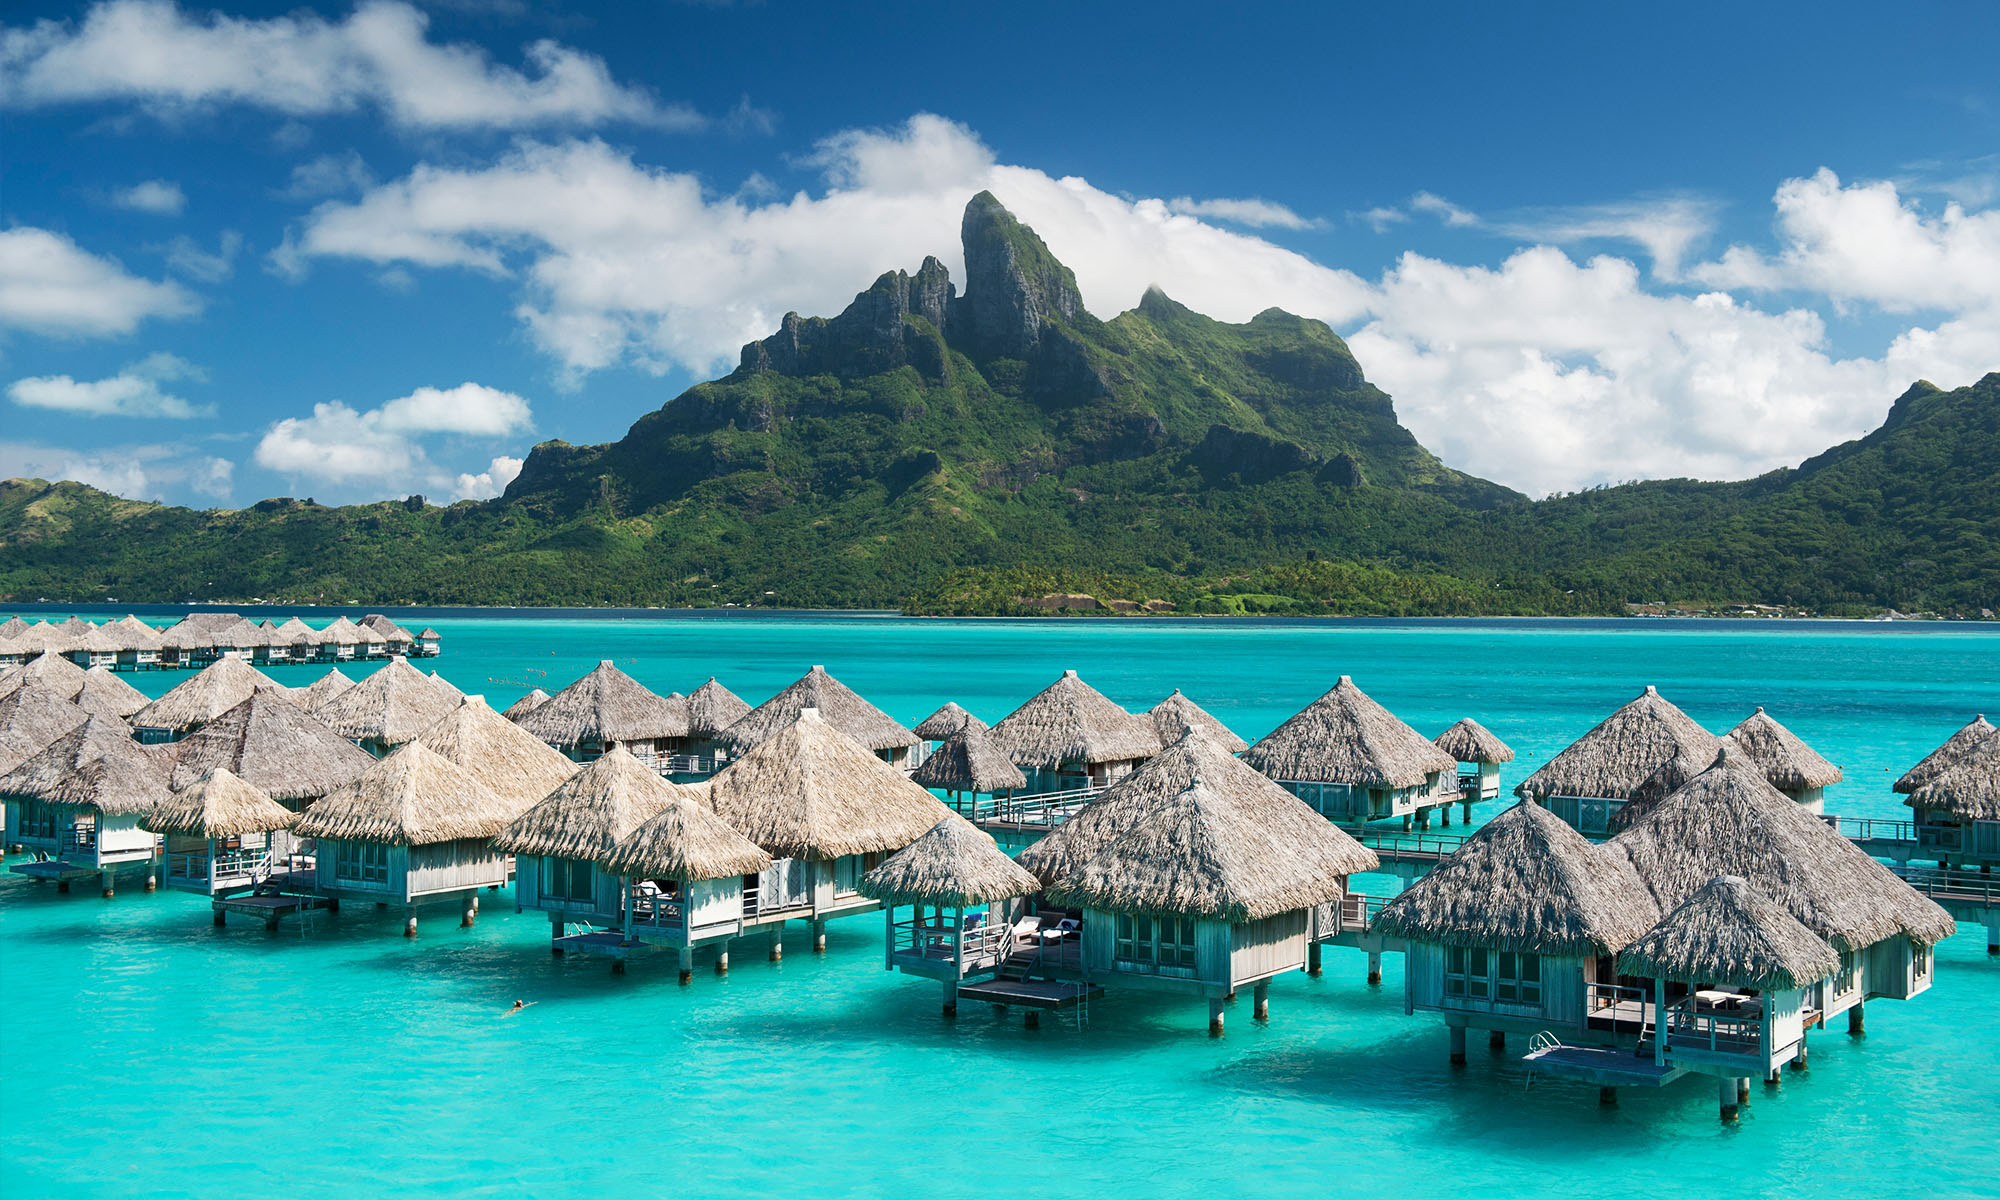 Los Angeles to Tahiti French Polynesia $600 RT Nonstop Airfares on Delta Air Lines BE (Travel January - March 2023)